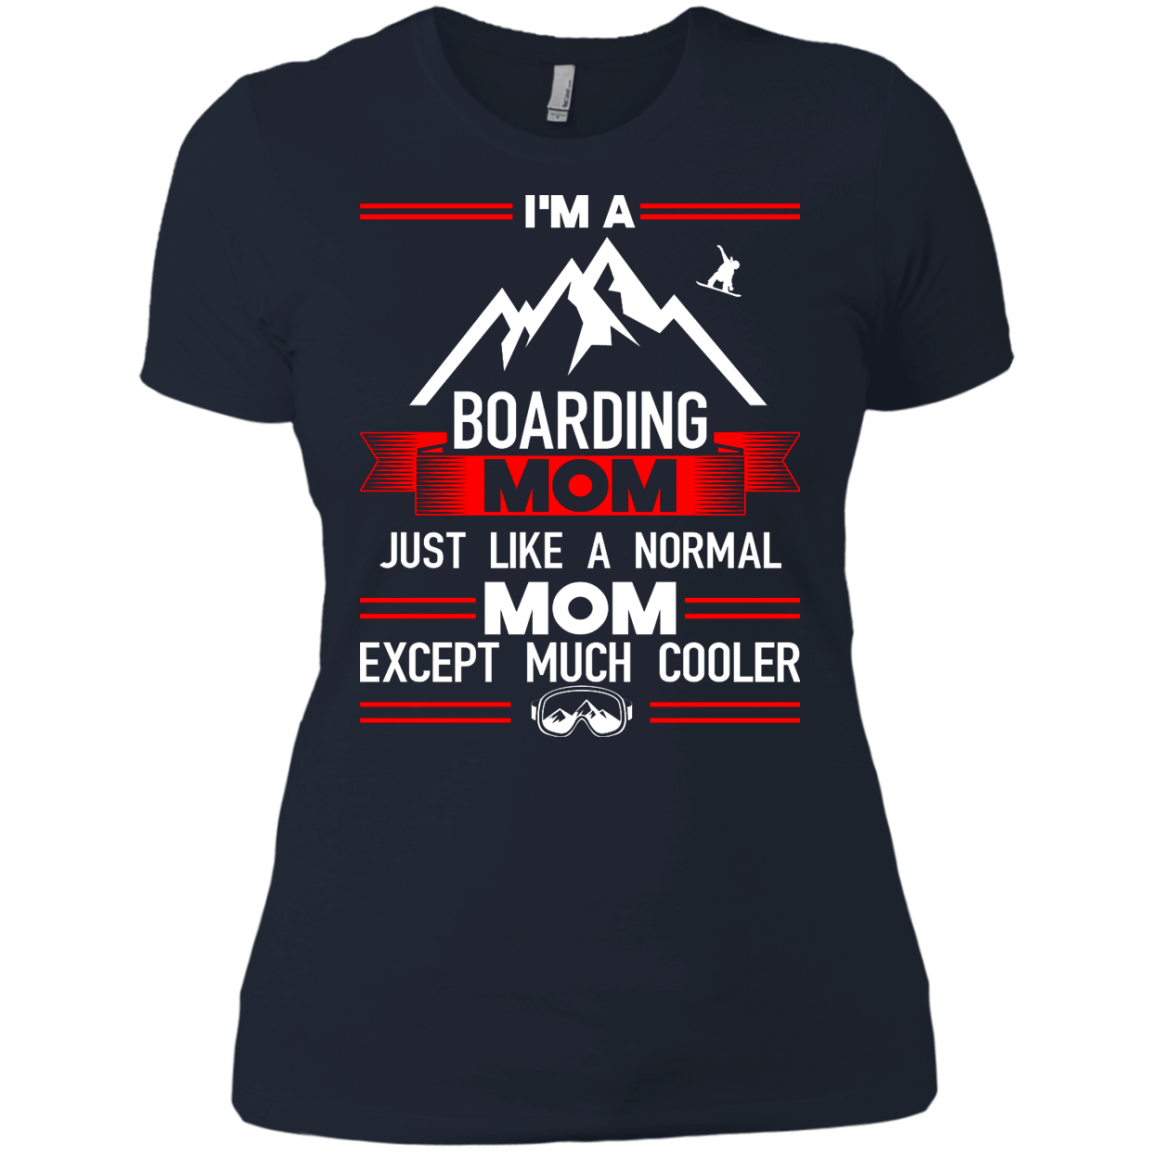 I'm A Boarding Mom Just Like A Normal Mom Except Much Cooler Tees - Powderaddicts